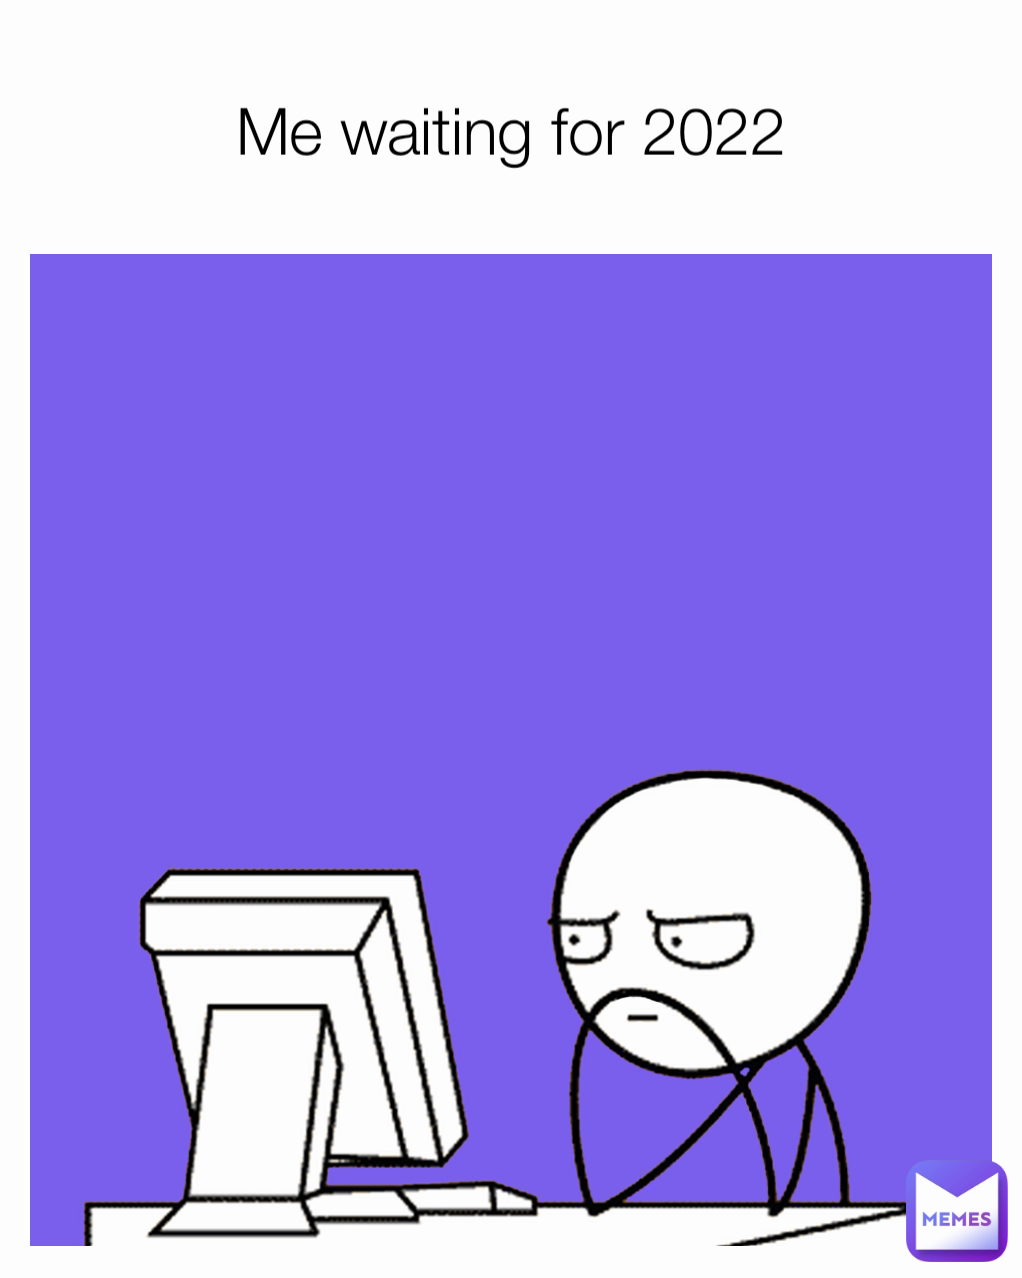 Me waiting for 2022